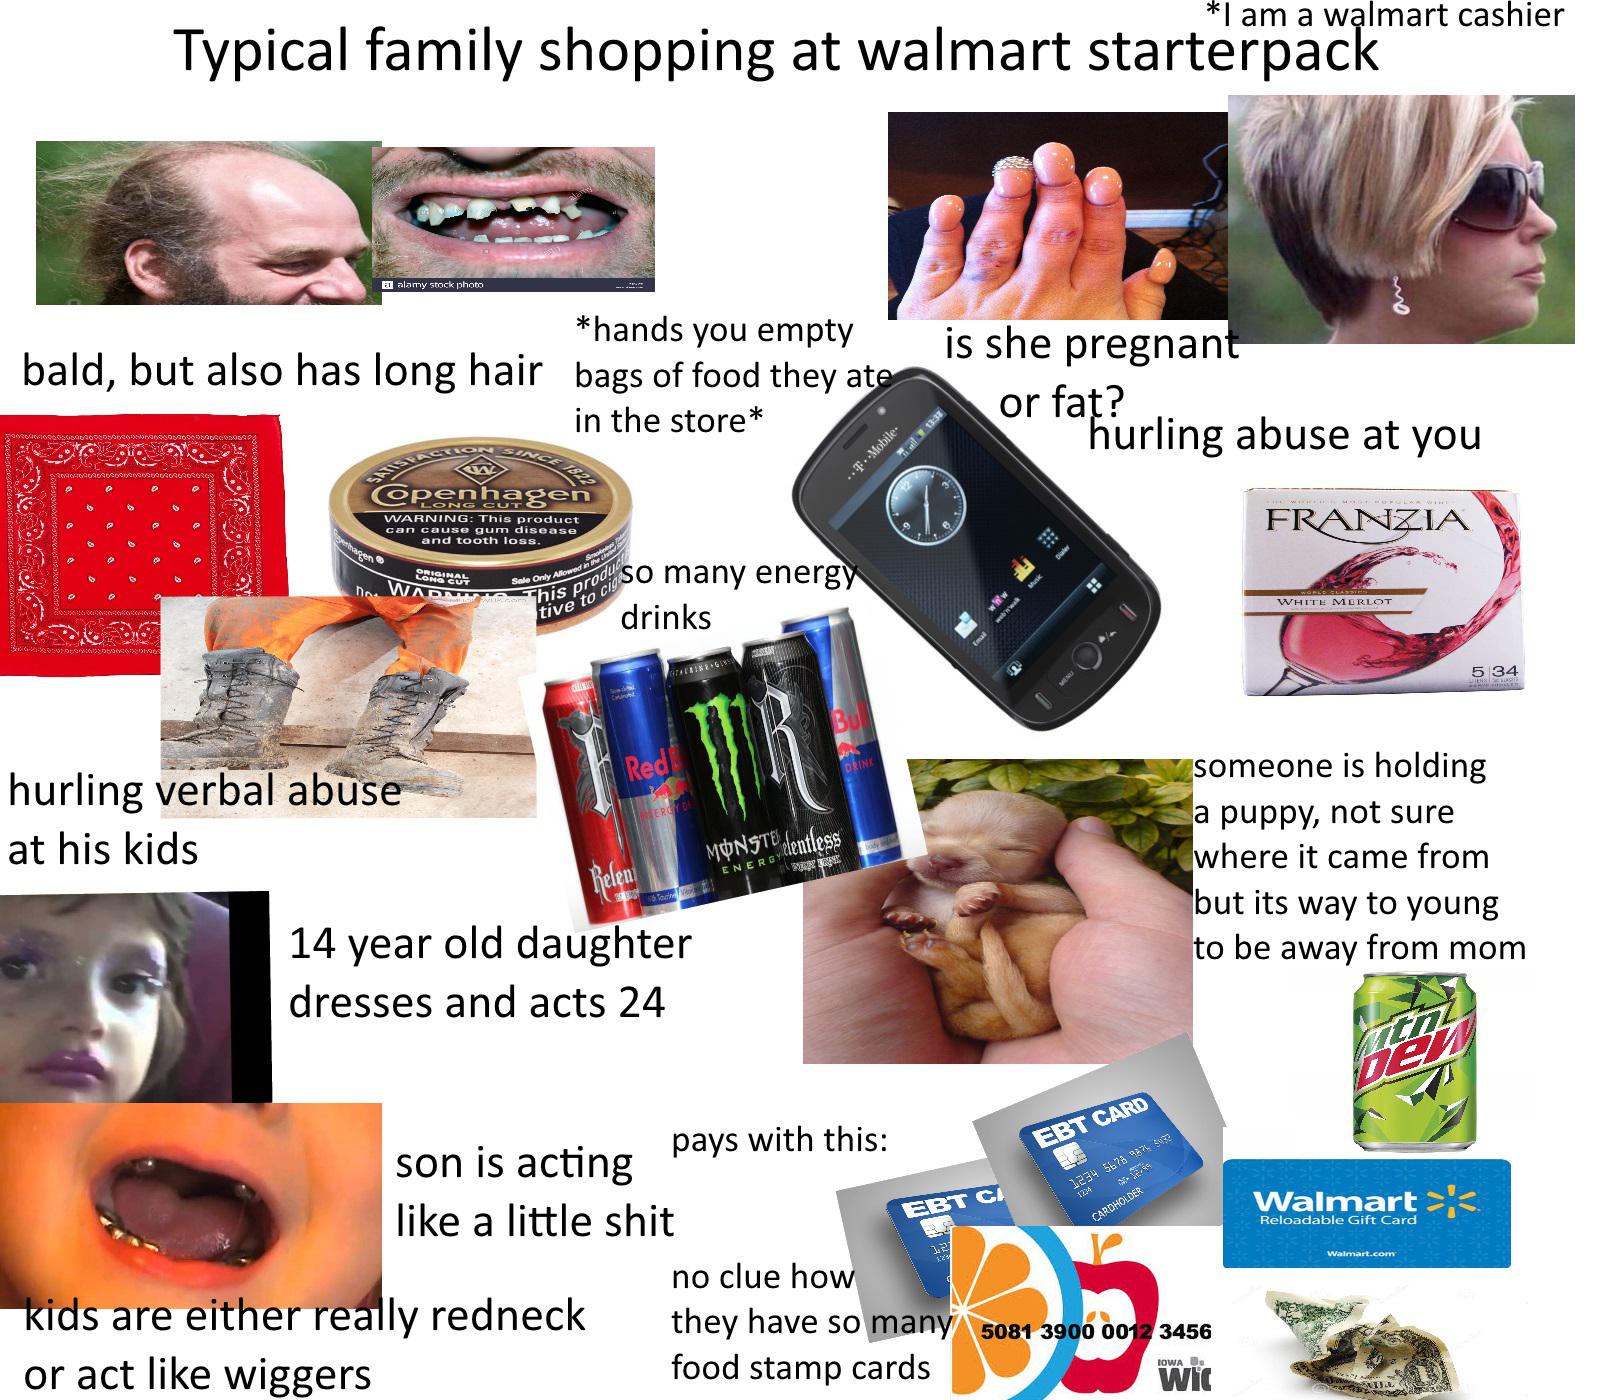 walmart cashier starter pack - I am a walmart cashier Typical family shopping at walmart starterpack El alamy stock photo wo hands you empty bald, but also has long hair bags of food they ate in the store is she pregnant or fat? "hurling abuse at you No V